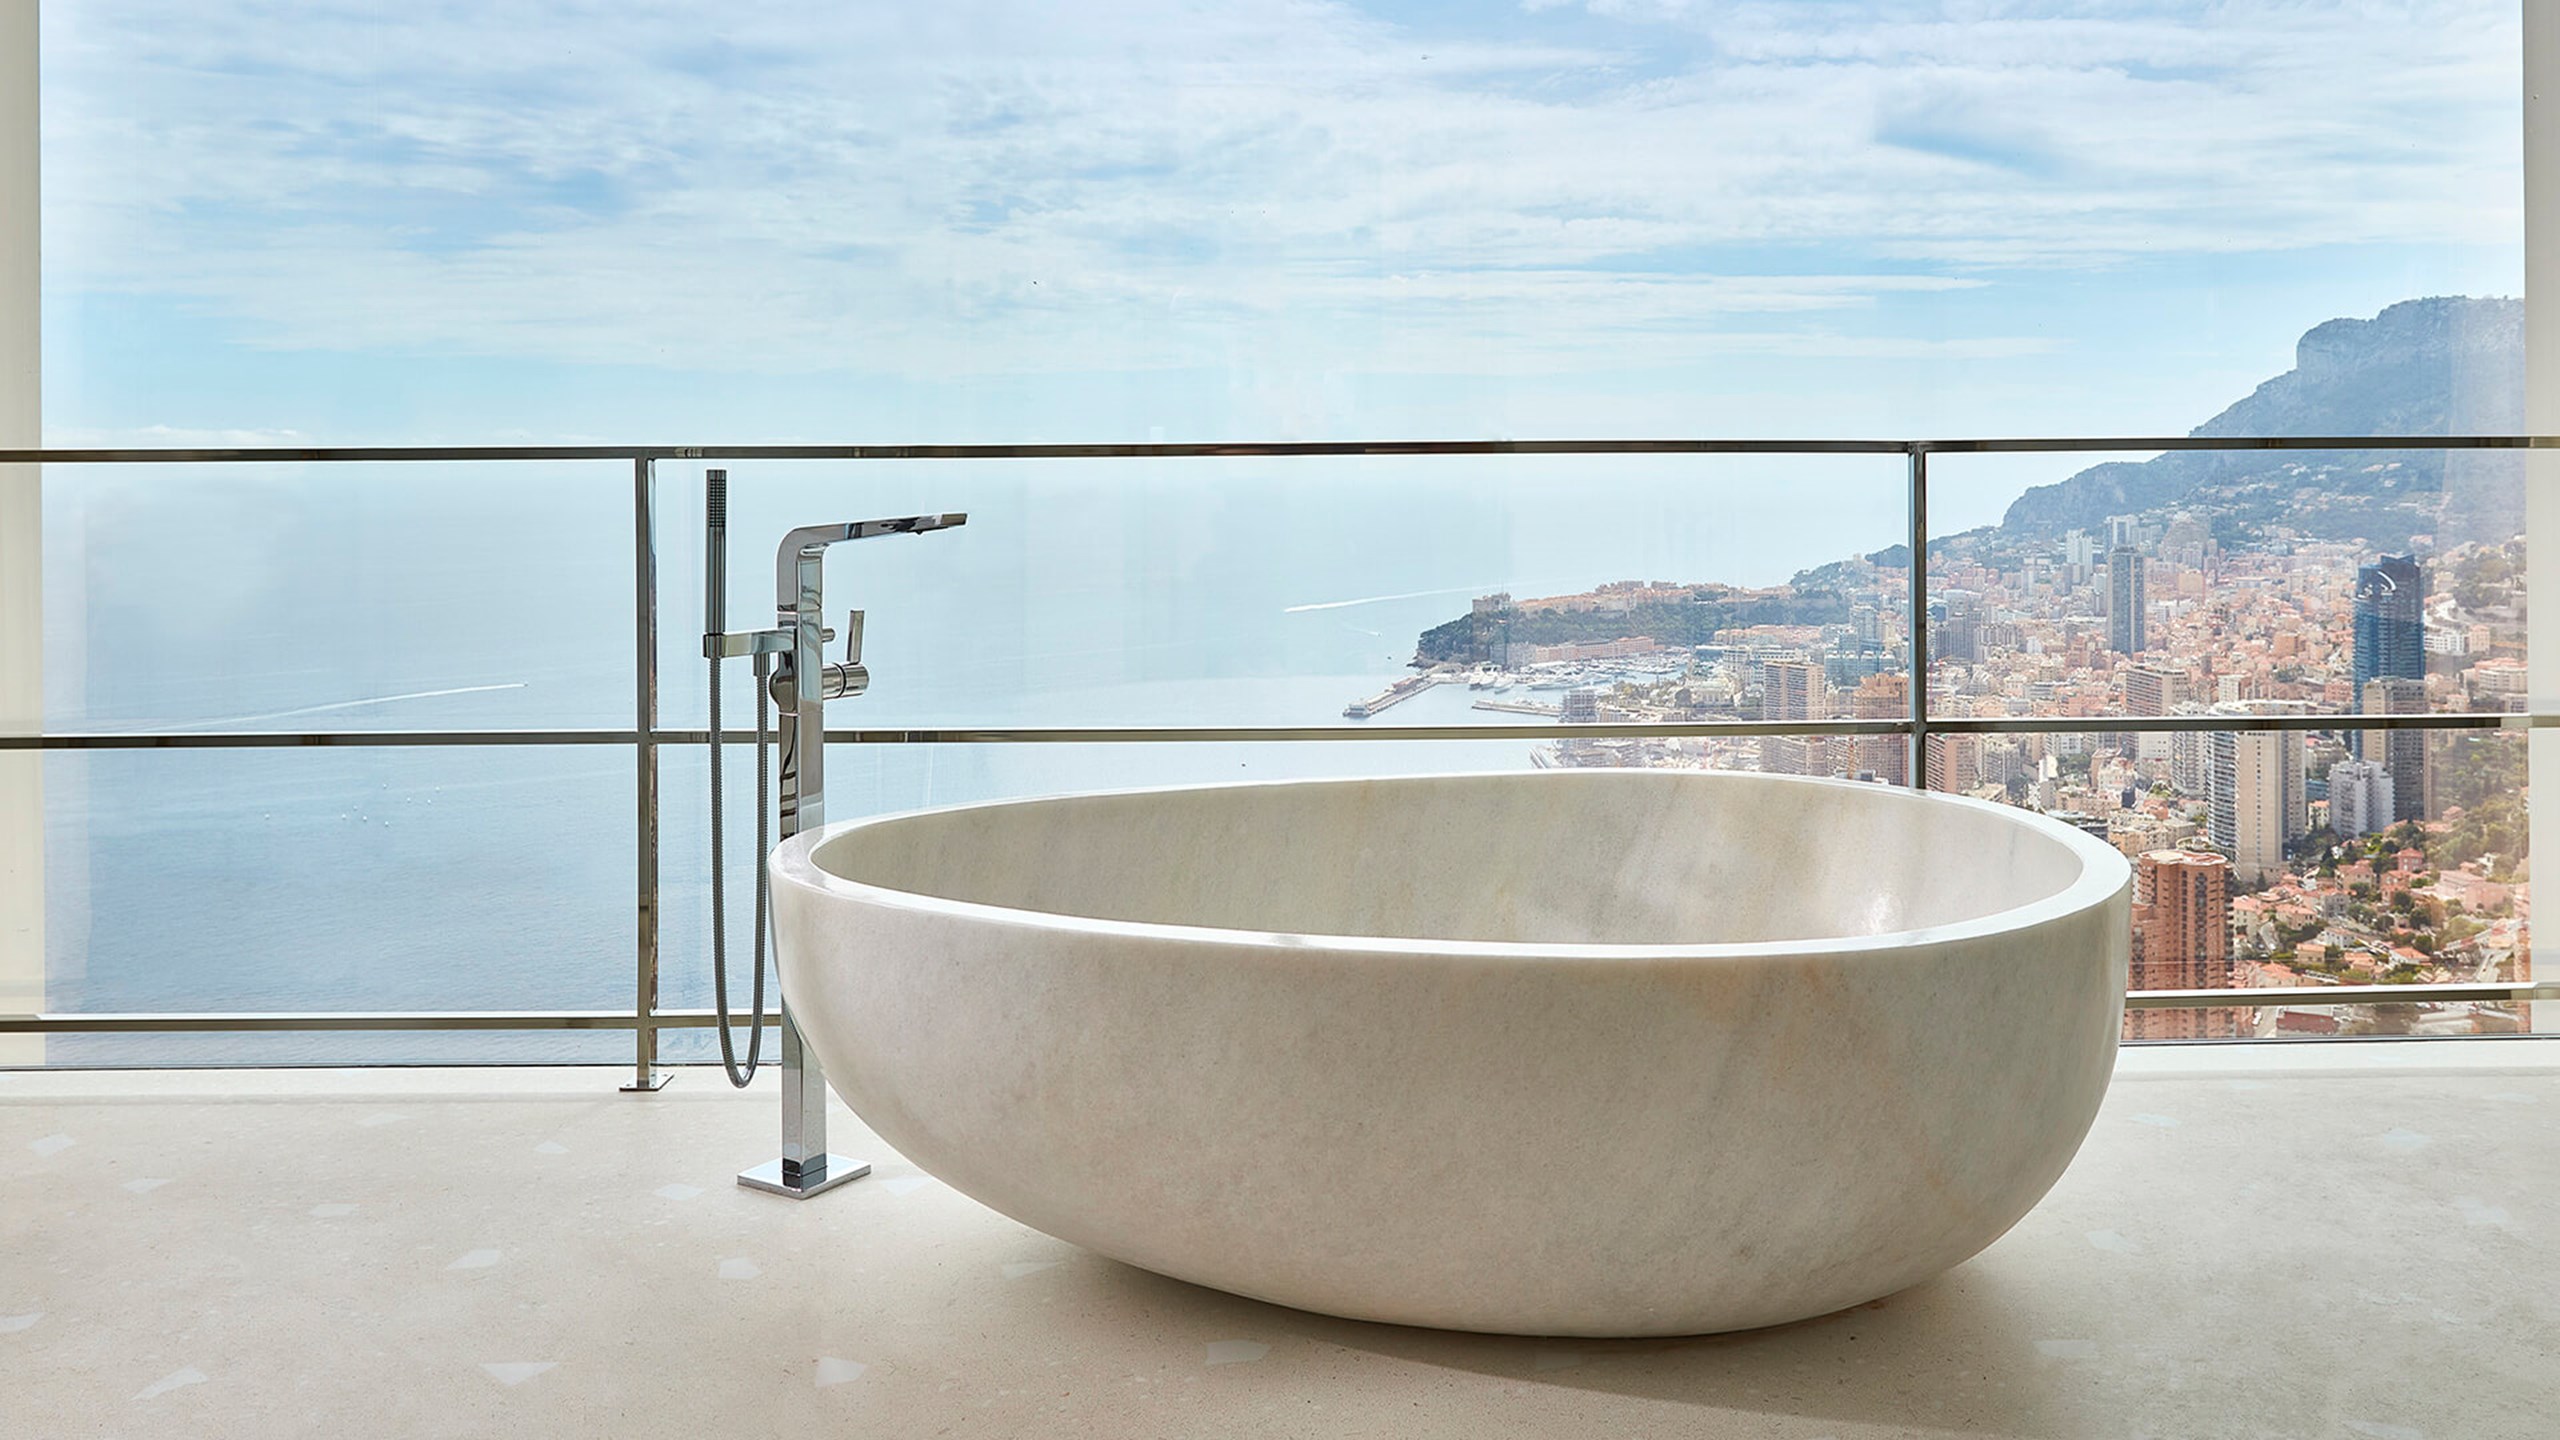 The Maybourne Suite bathtub view